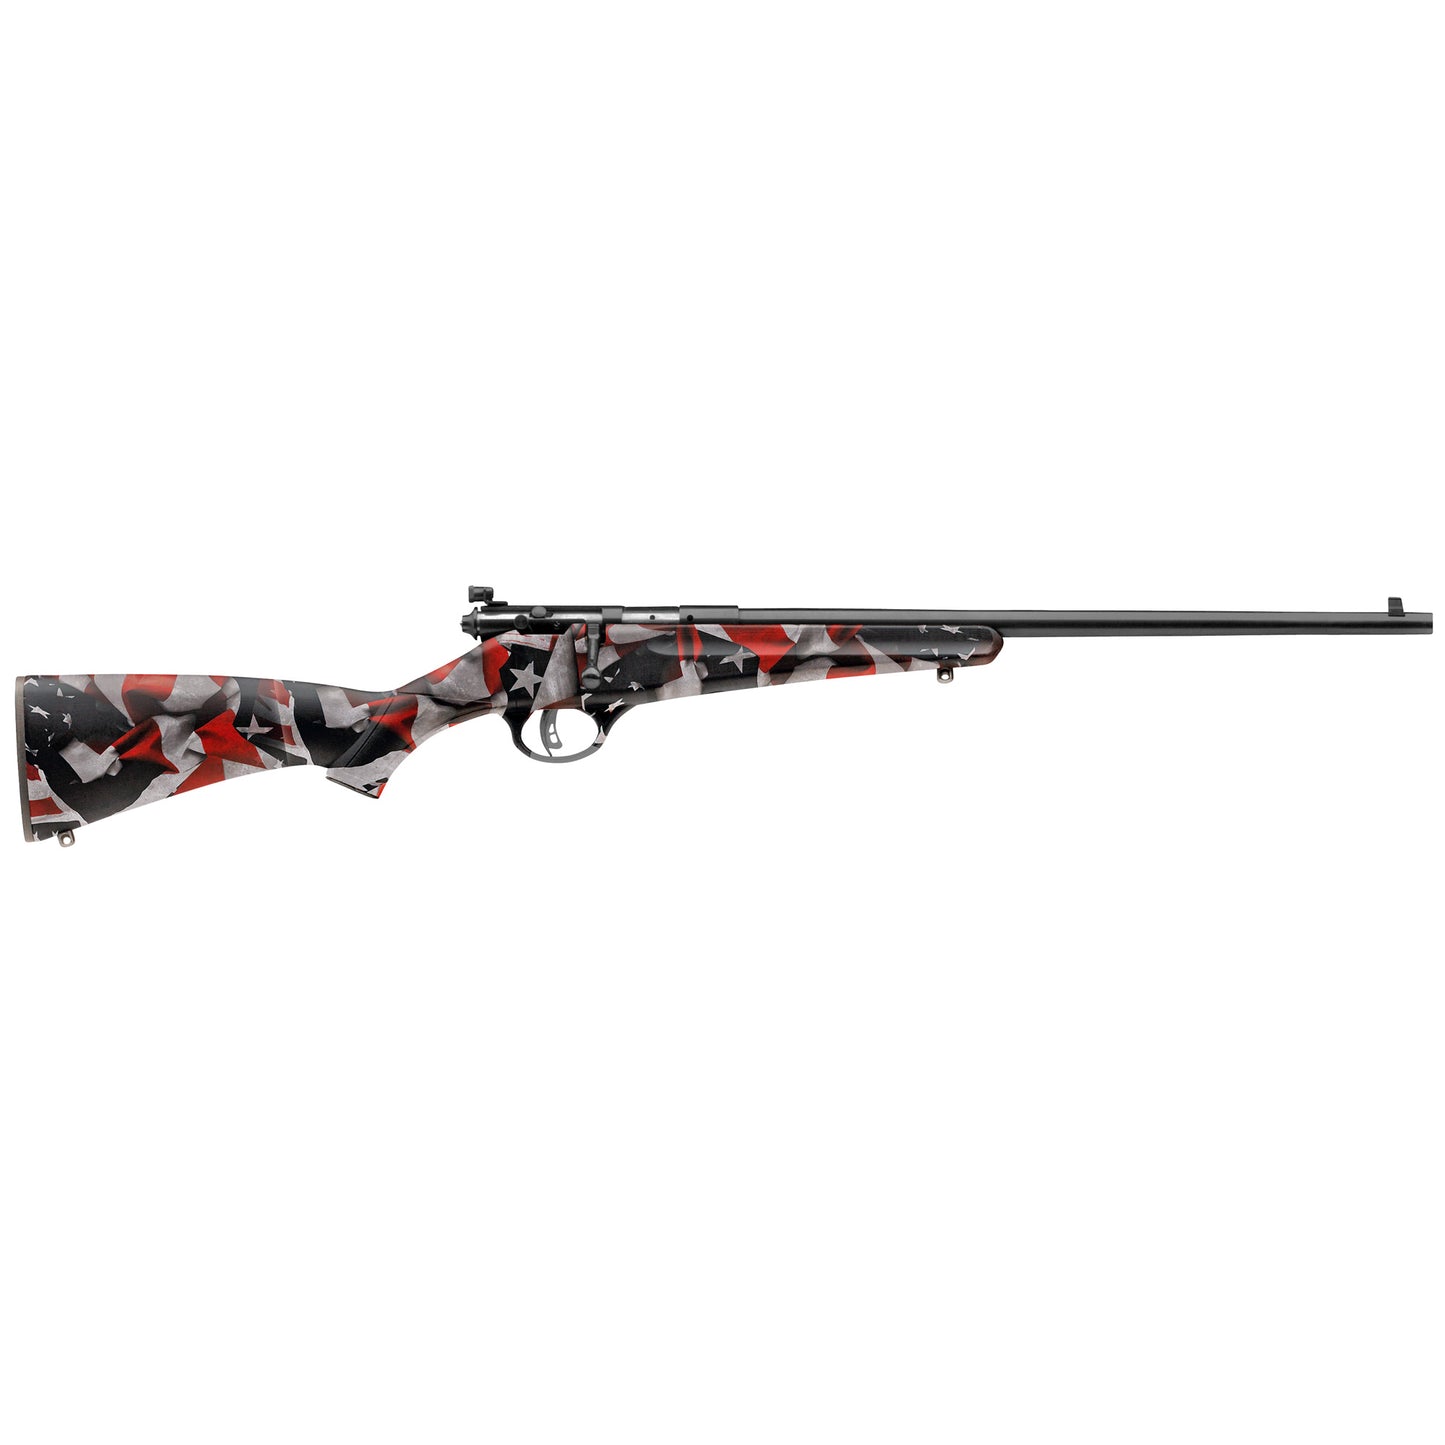 Savage, Rascal, Bolt Action, 22LR, 16.125" Barrel, American Flag Synthetic Stock, AccuTrigger, Adjustable Peep Sights, Single Shot, Right Hand